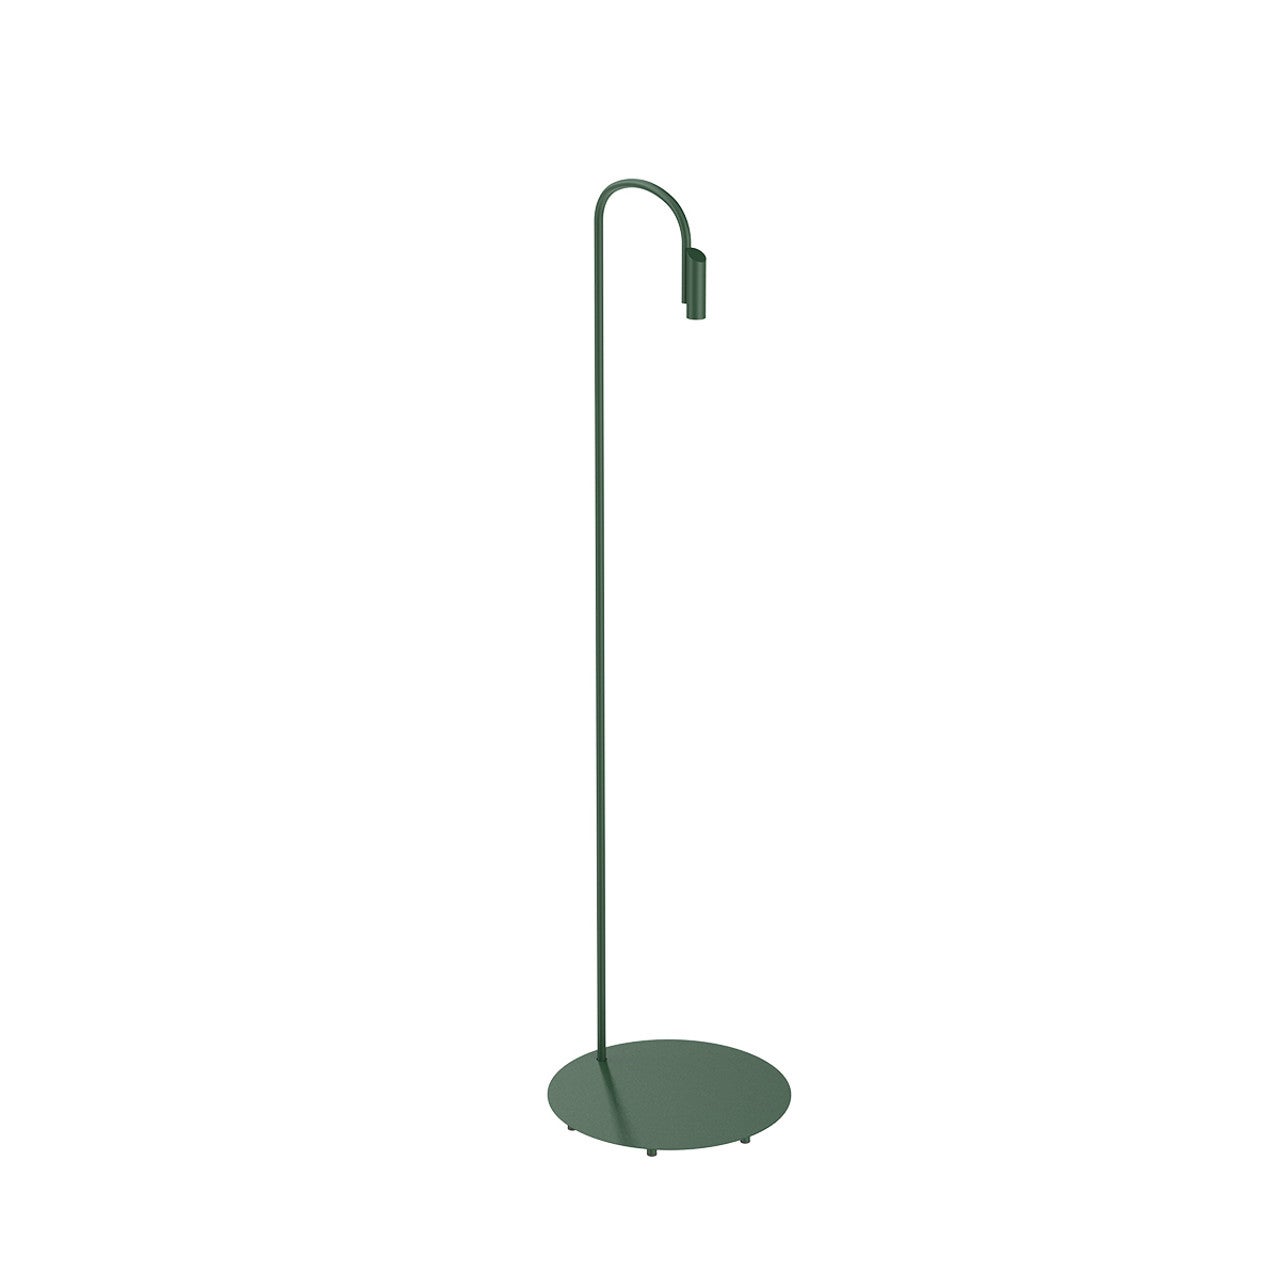 Flos Caule 3000K Model 4 Outdoor Floor Lamp in Forest Green with Regular Shade For Sale